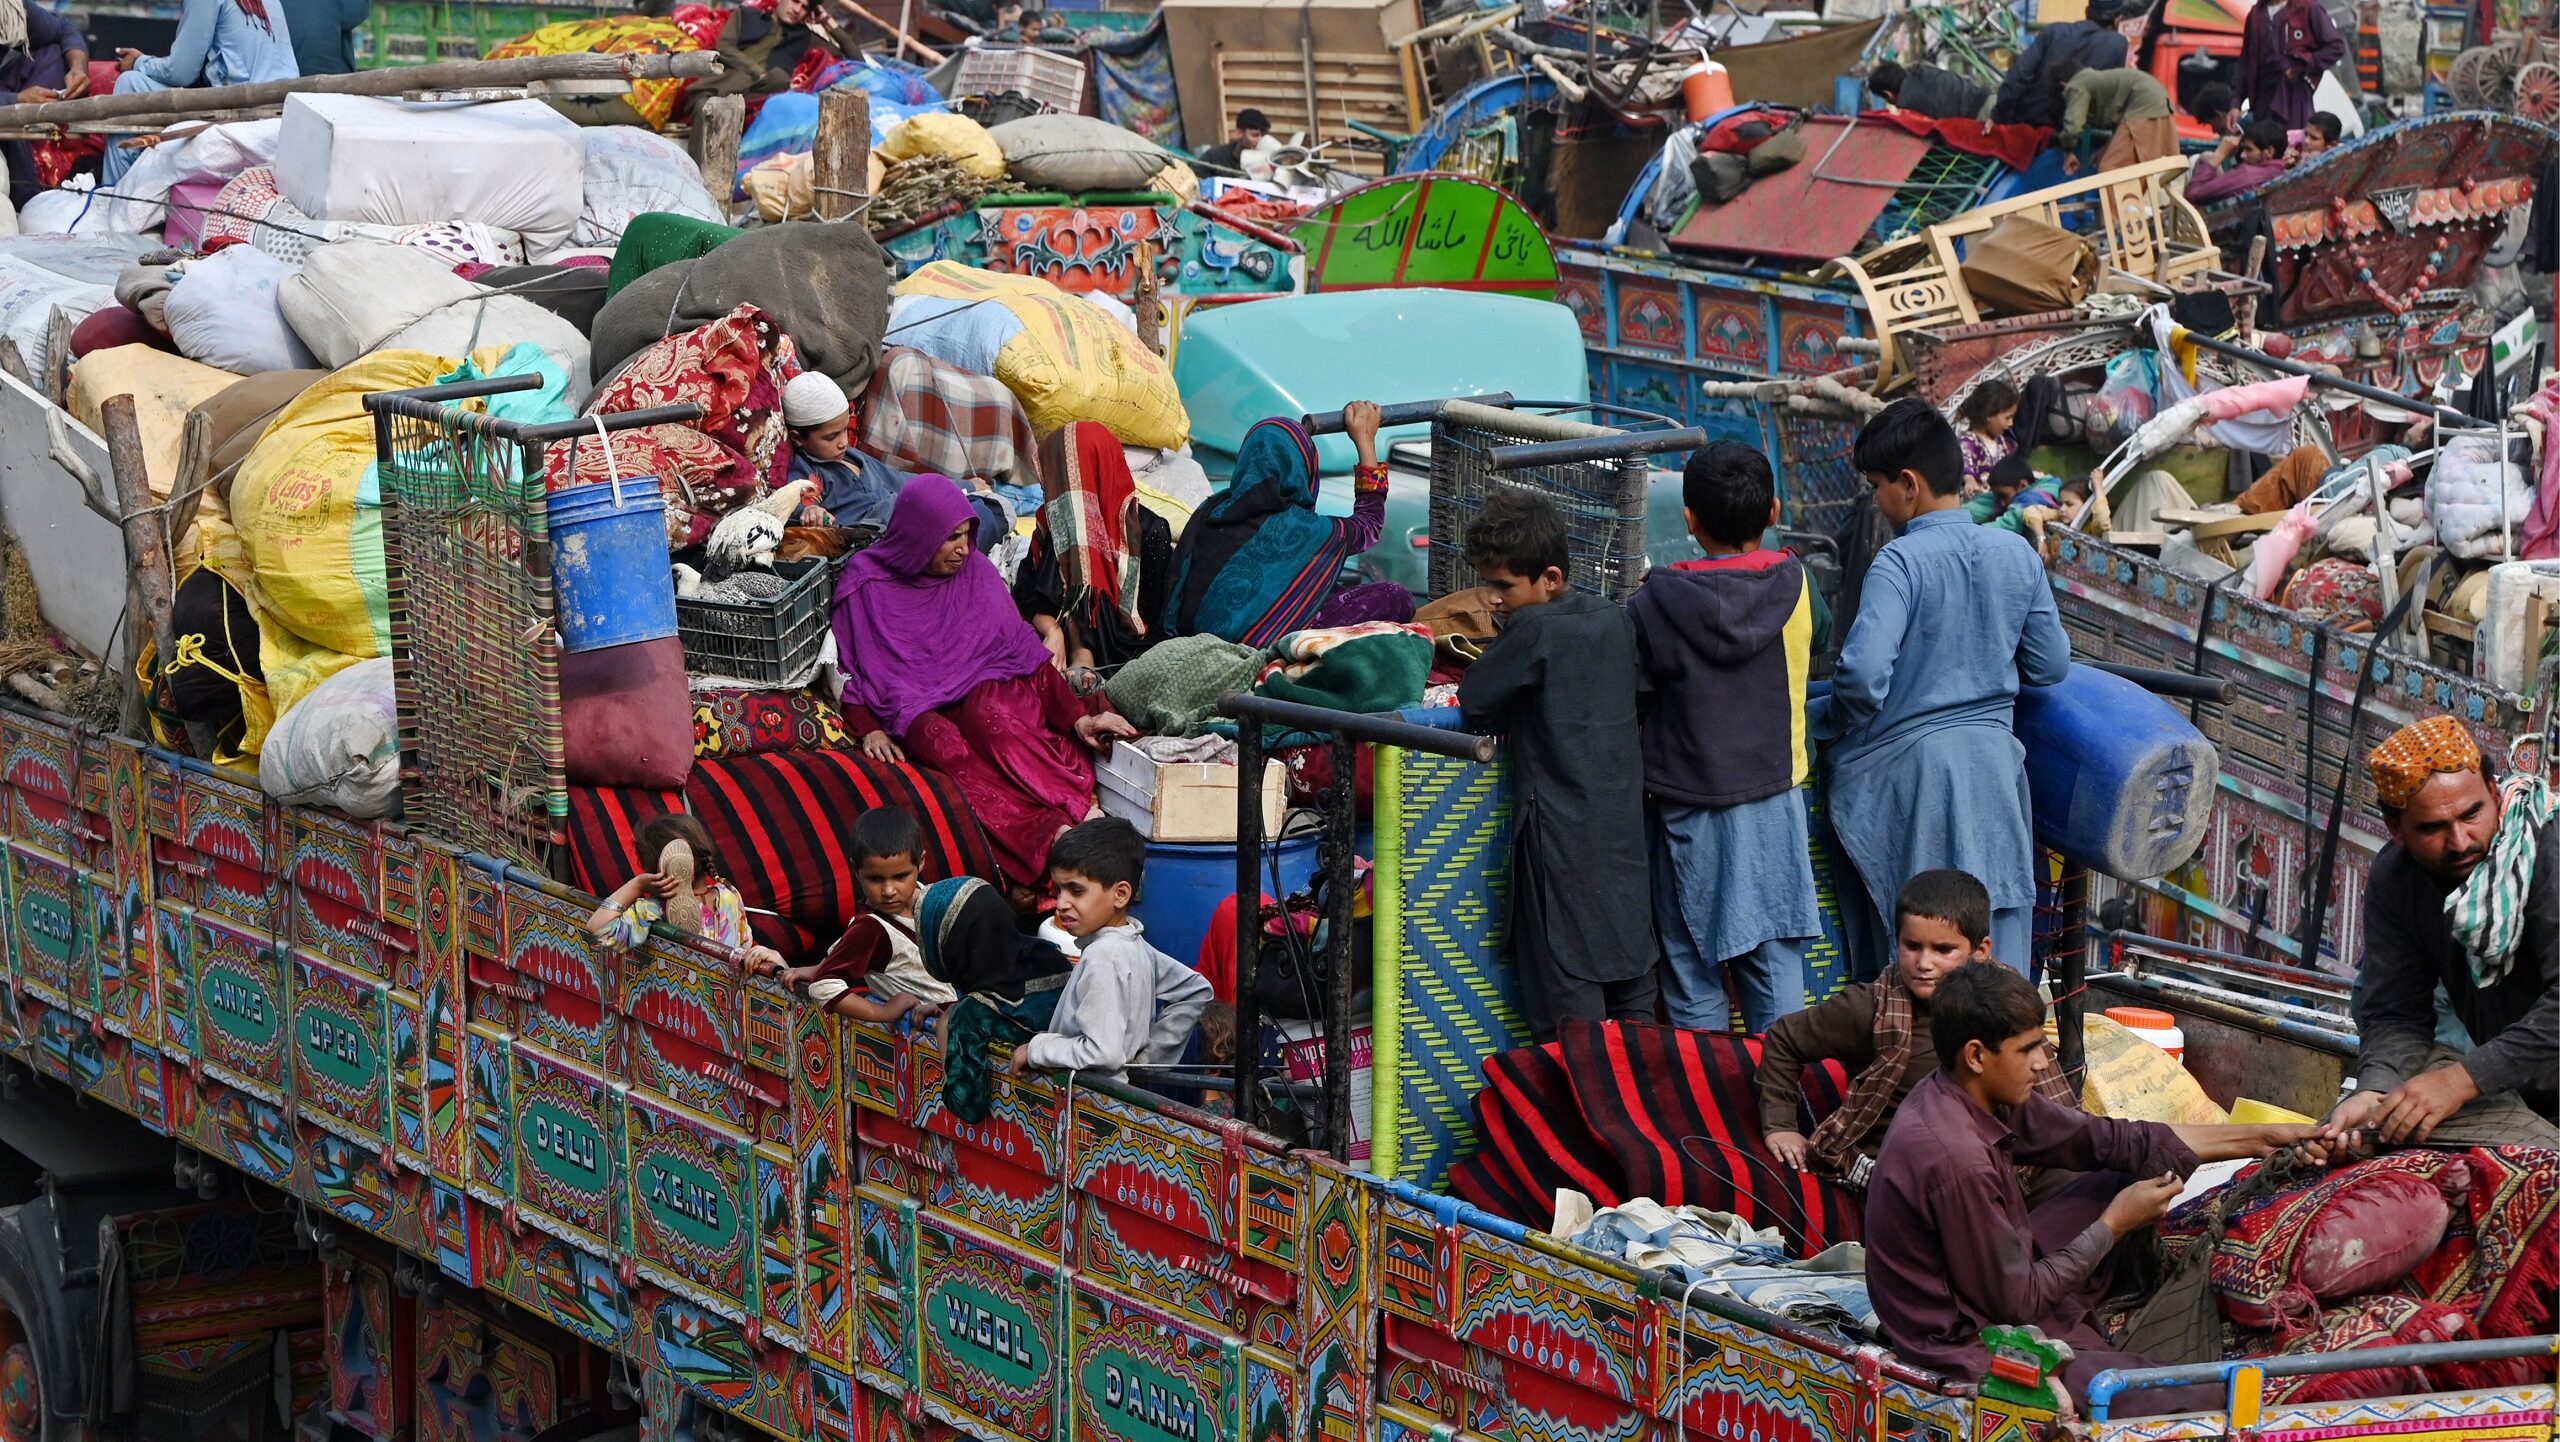 Afghan Refugees in Pakistan Under Pressure as Deadline Passes for Undocumented Migrants To Leave